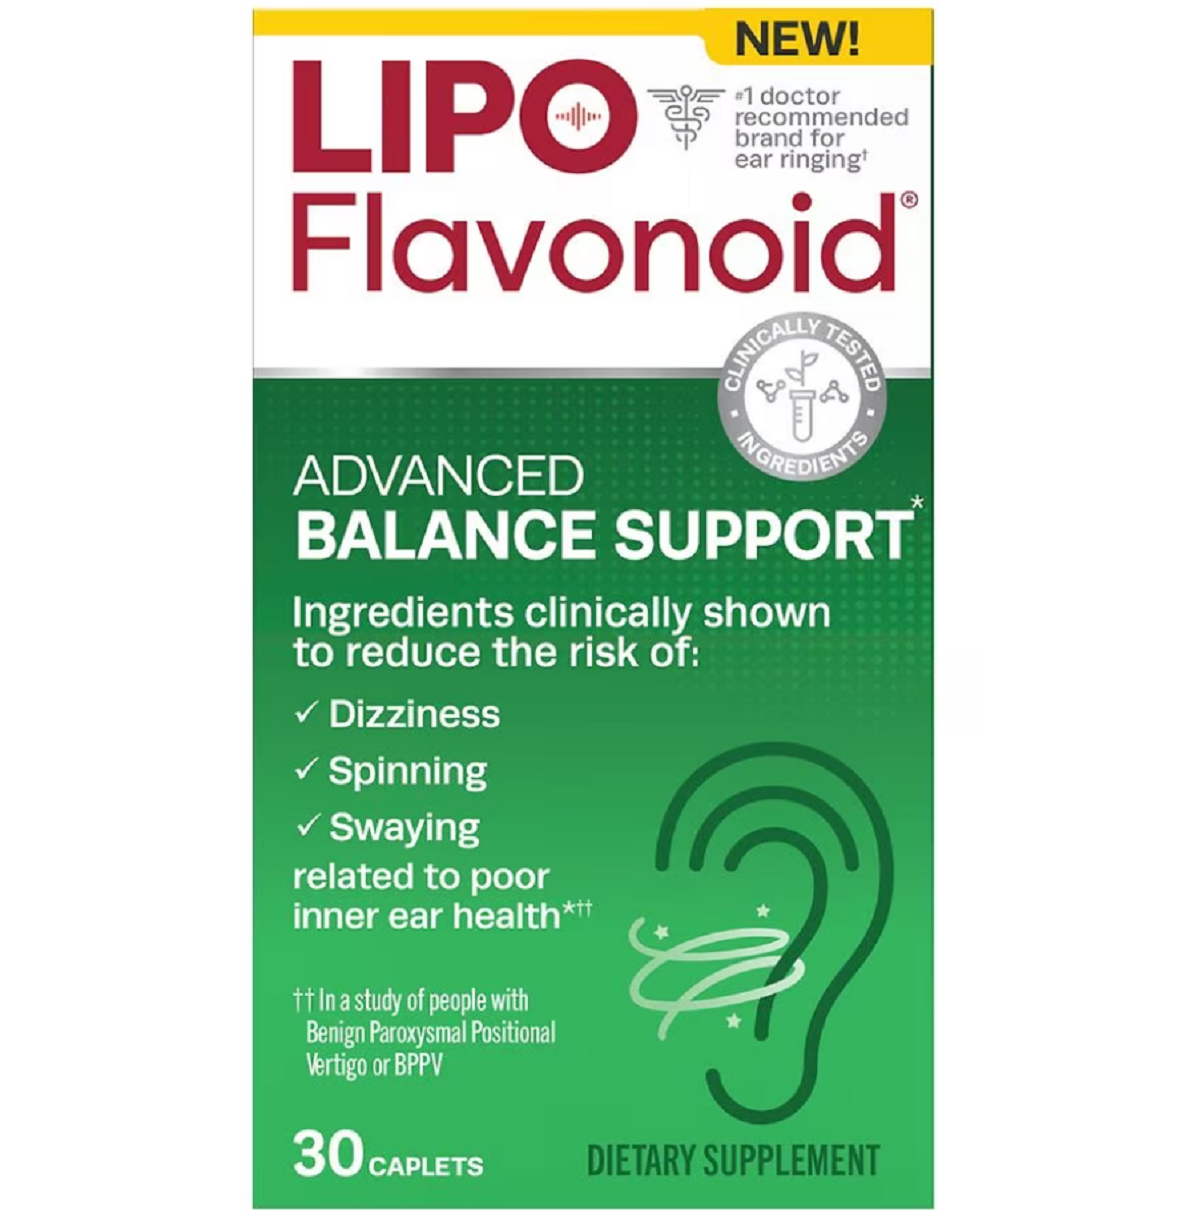 Lipo Flavonoid Coupon: $7 Off on 1 New Lipo Flavonoid Advanced Support Item